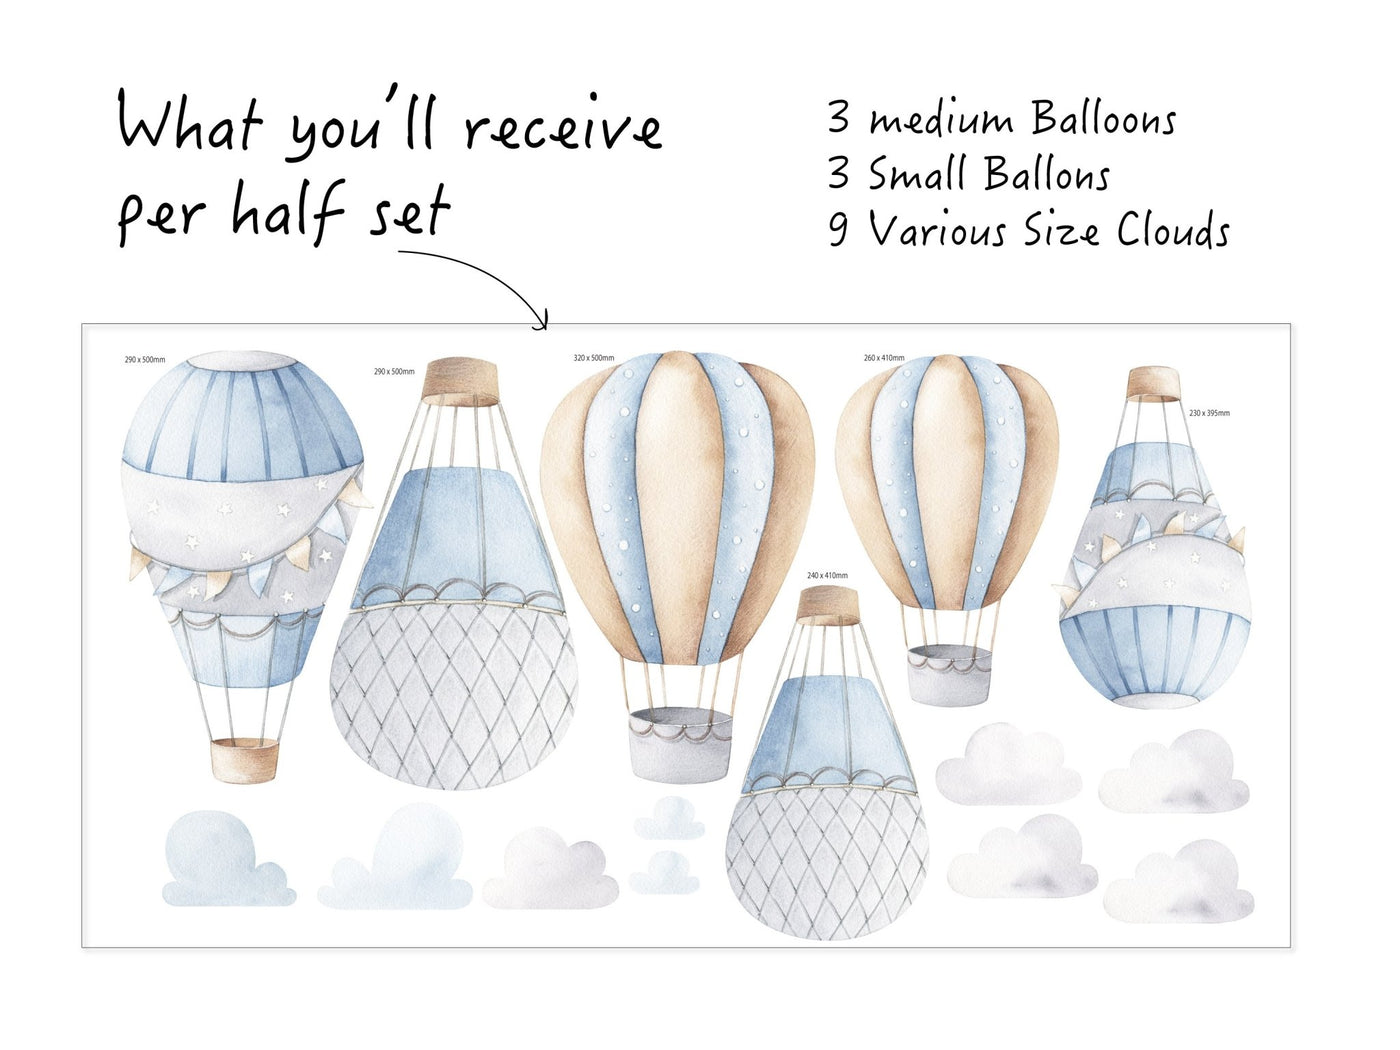 Vintage Hot Air Balloons Decals - Jack Harry and Ollie